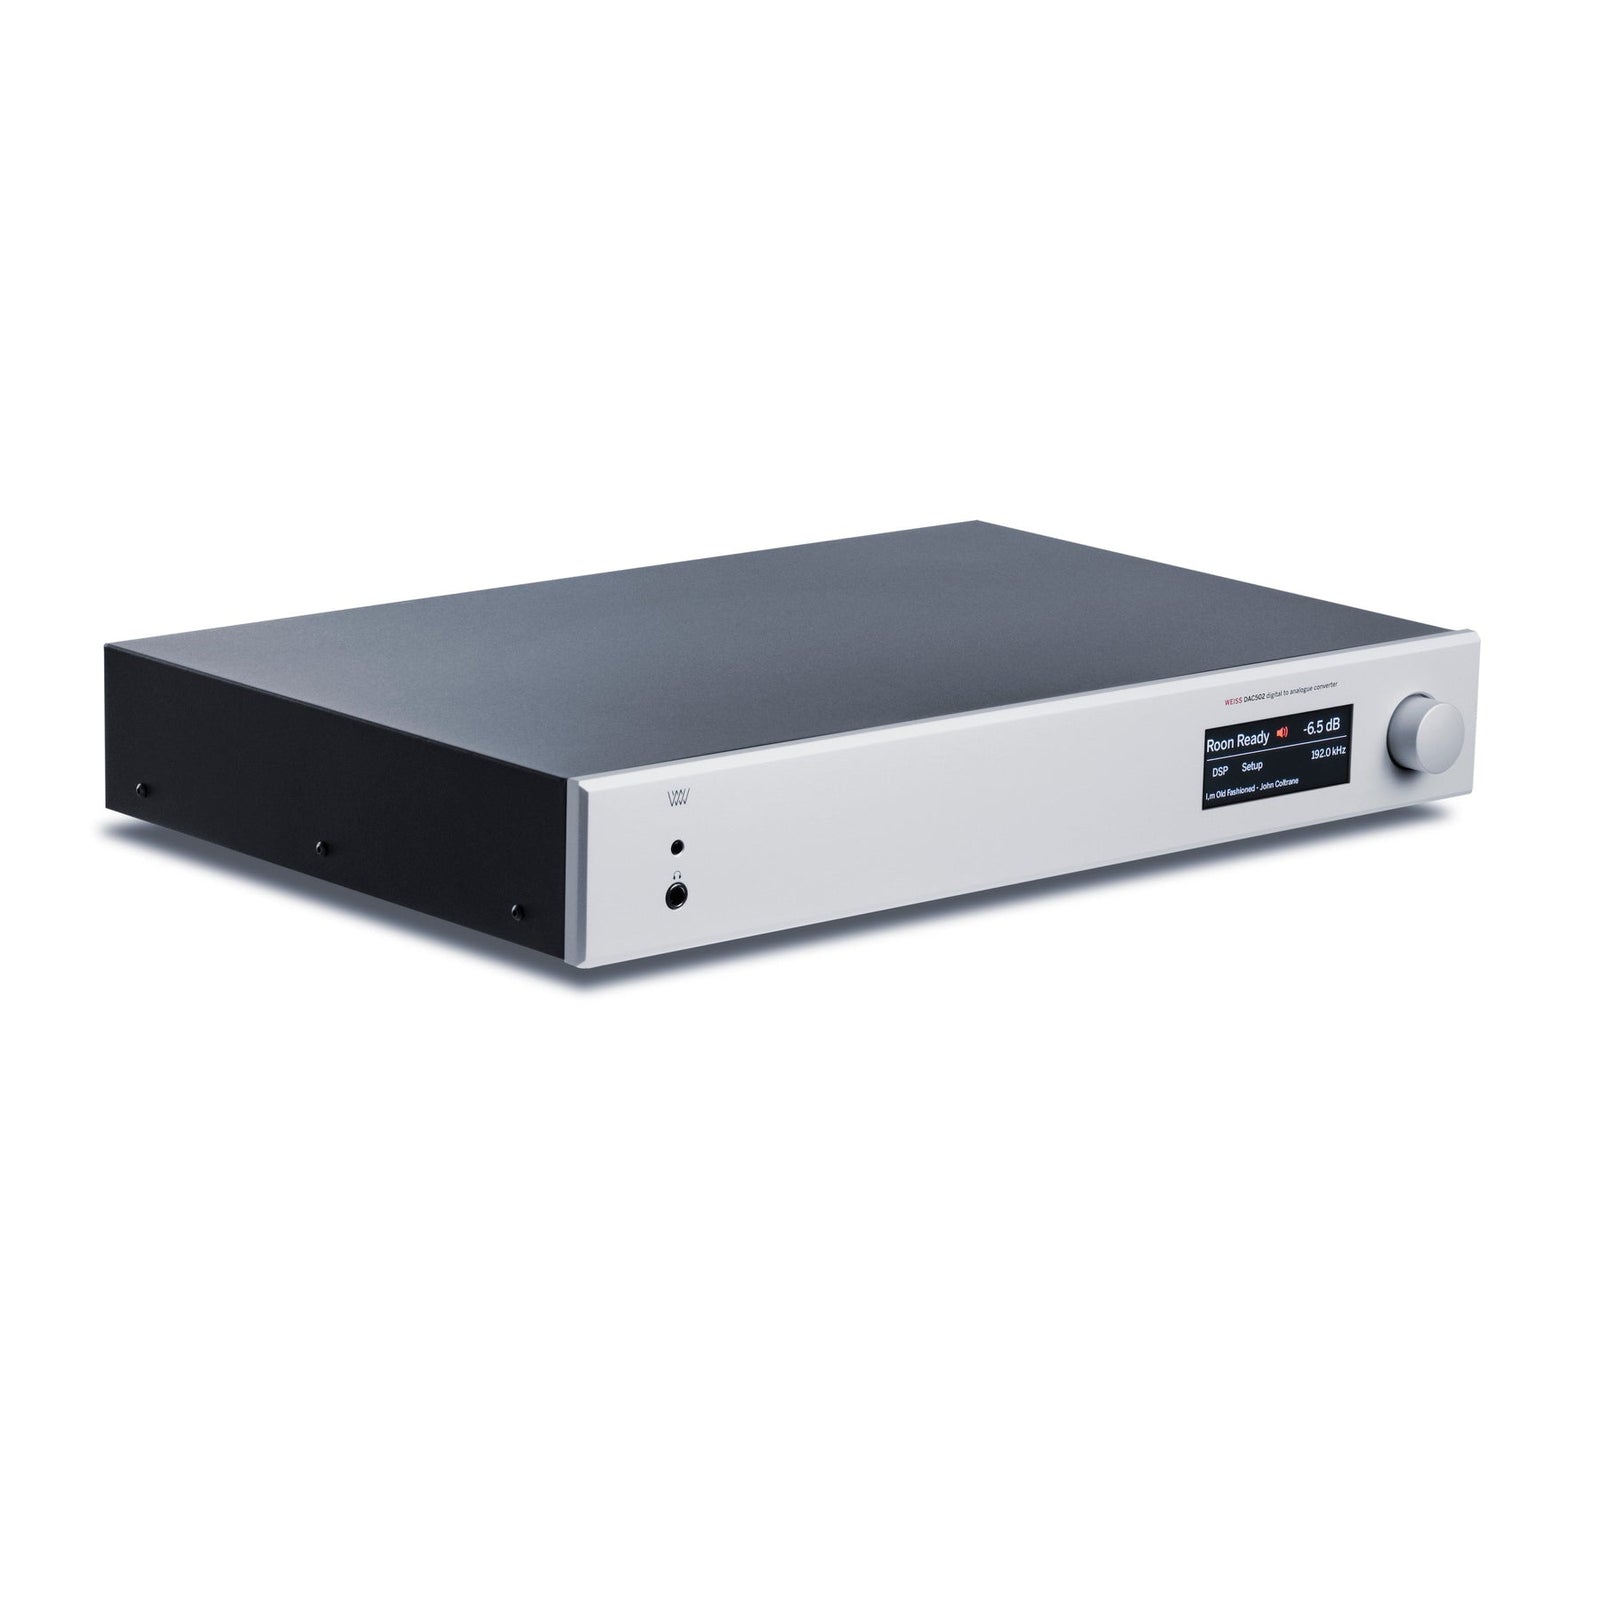 The DAC502 is a state of the art D/A Converter with an unprecedented level of sophistication and versatility. With the DAC502 is creating a new paradigm for what used to be a black box device. A typical D/A Converter is a "set and forget" device. Not so with the DAC502